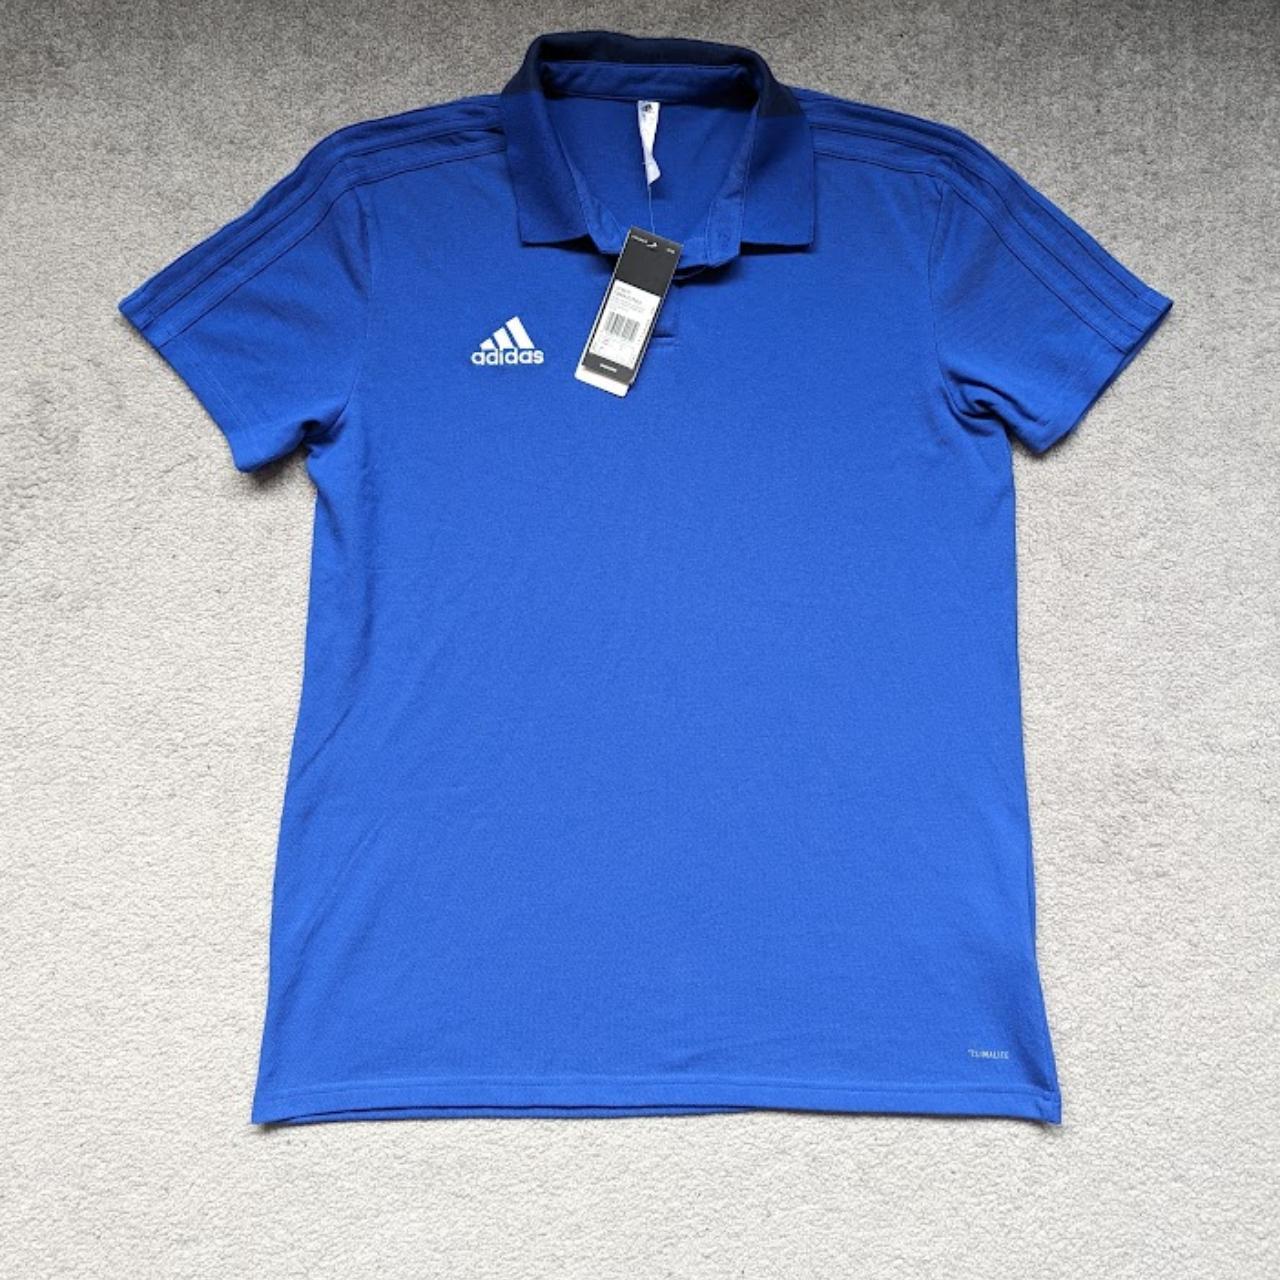 For Sale, Brand New Tags Adidas Polo Shirt. This... - Depop